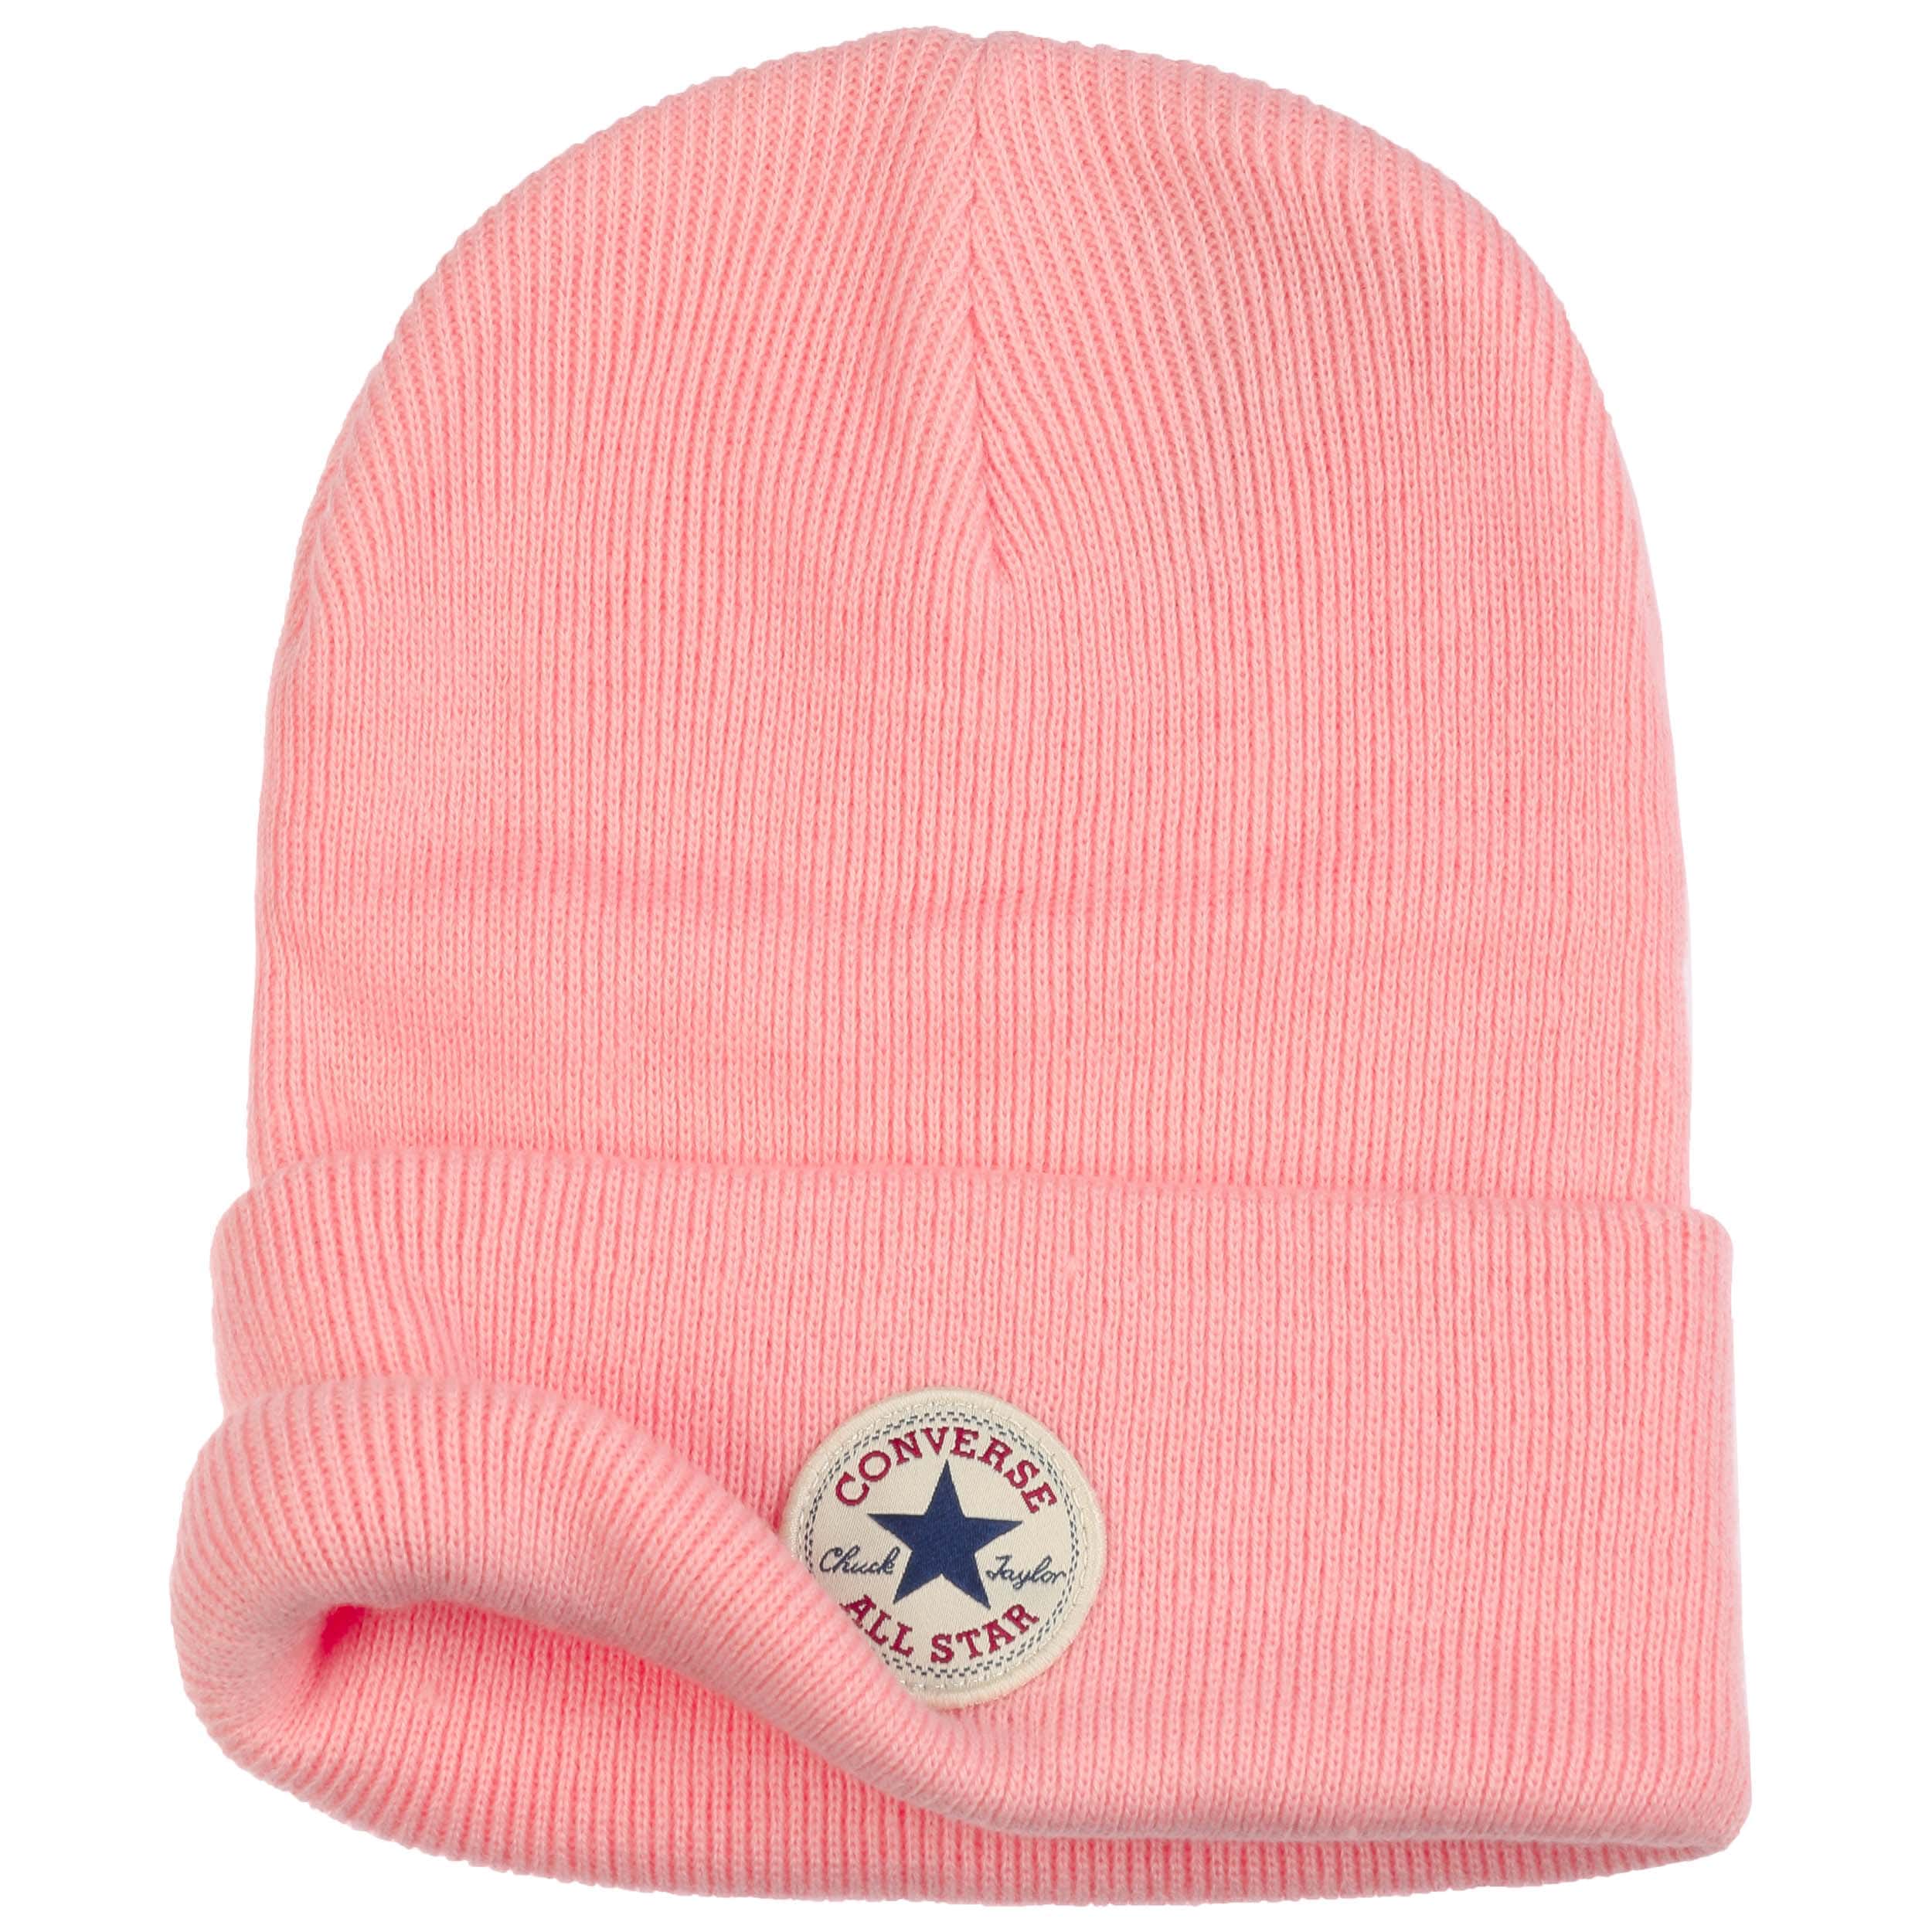 All Star Beanie with Cuff by Converse - 21,95 €